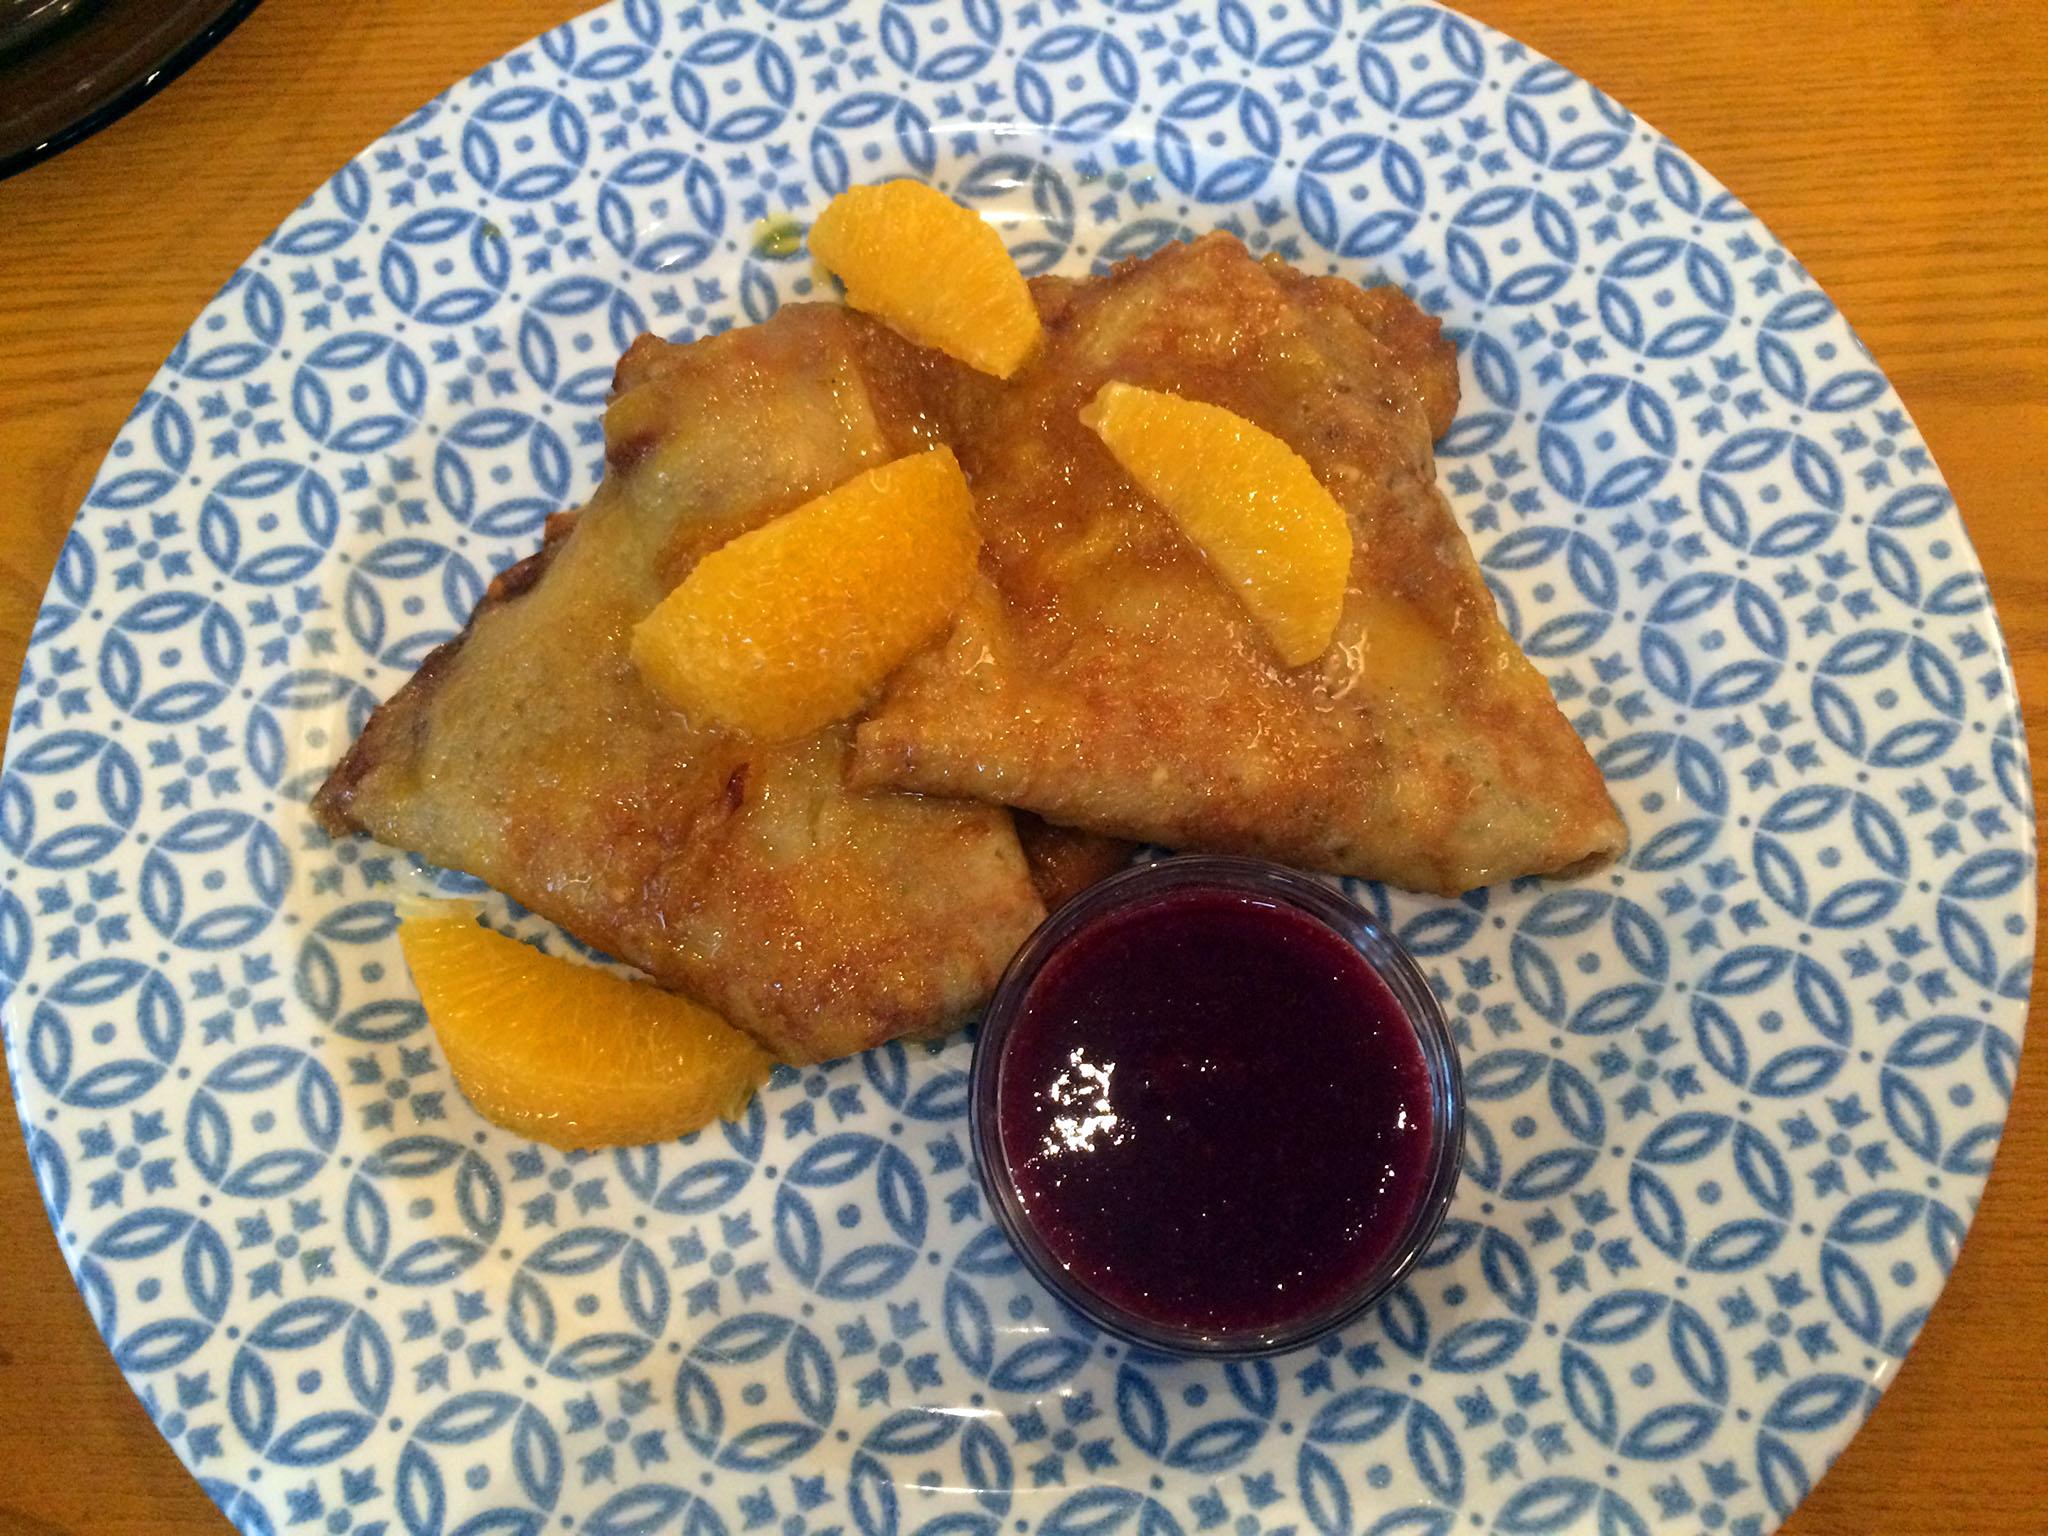 Richly sweet, the Crêpe Suzette comes topped with oranges and served with a raspberry sauce